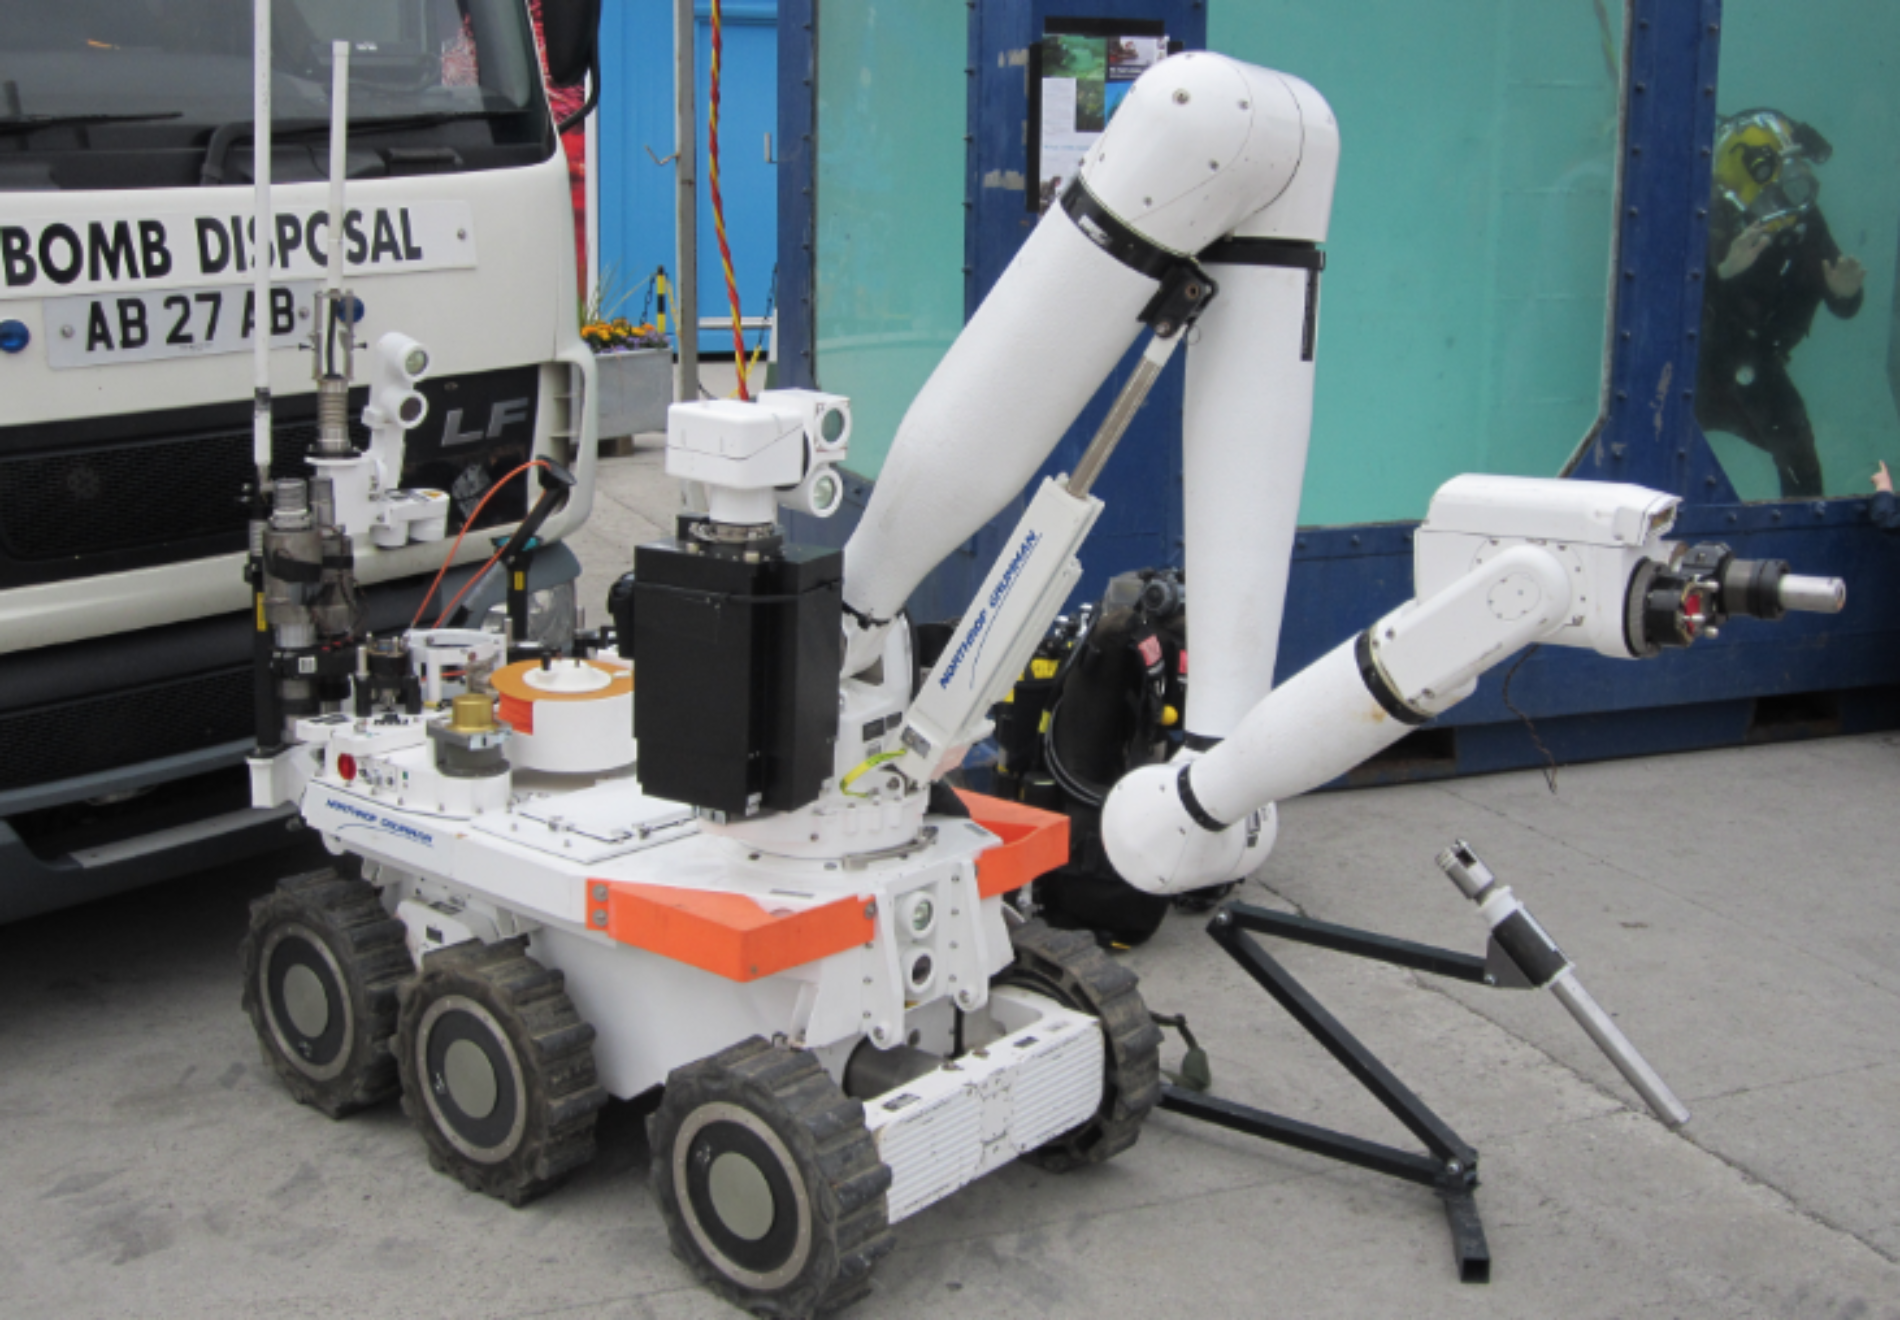 The Past and Future of Bomb Disposal Robots